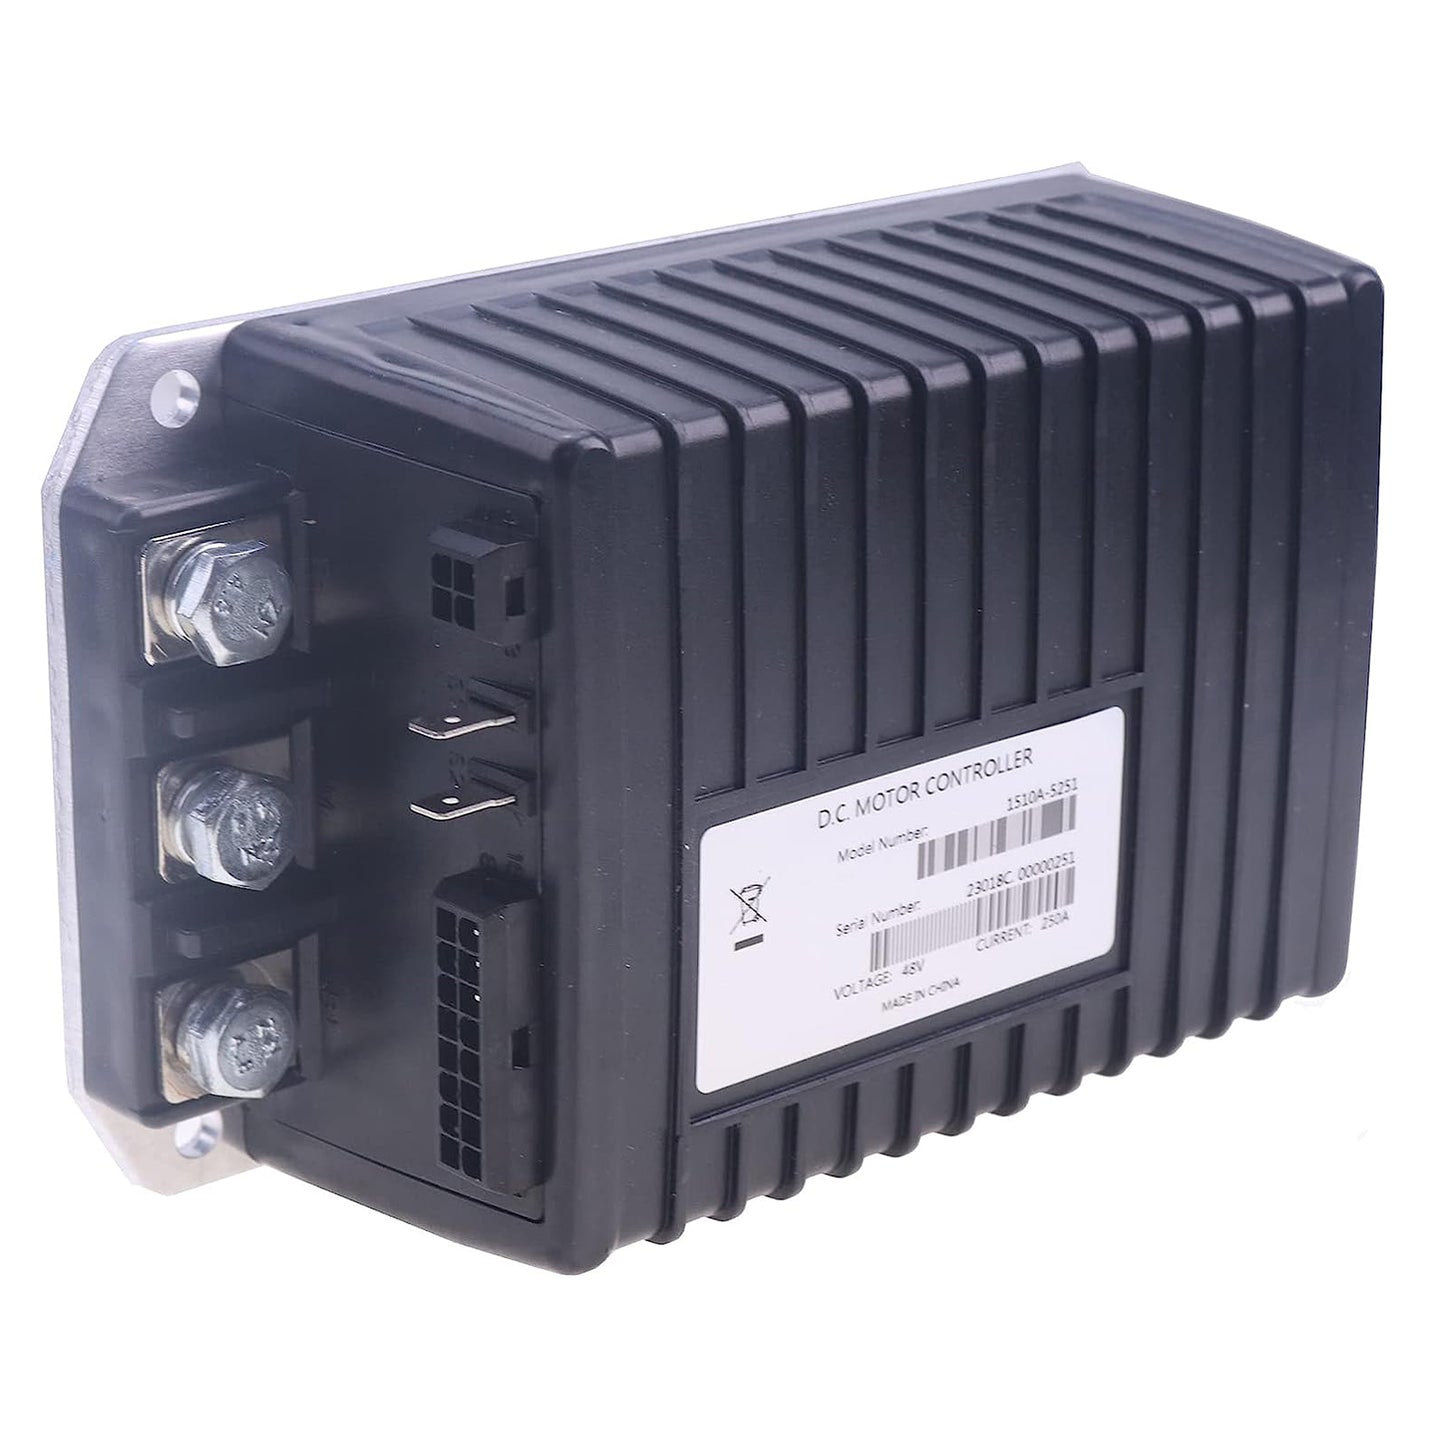 1510A-5251 48V 275A DC Motor Controller Compatible with Curtis Club Car Golf Cart